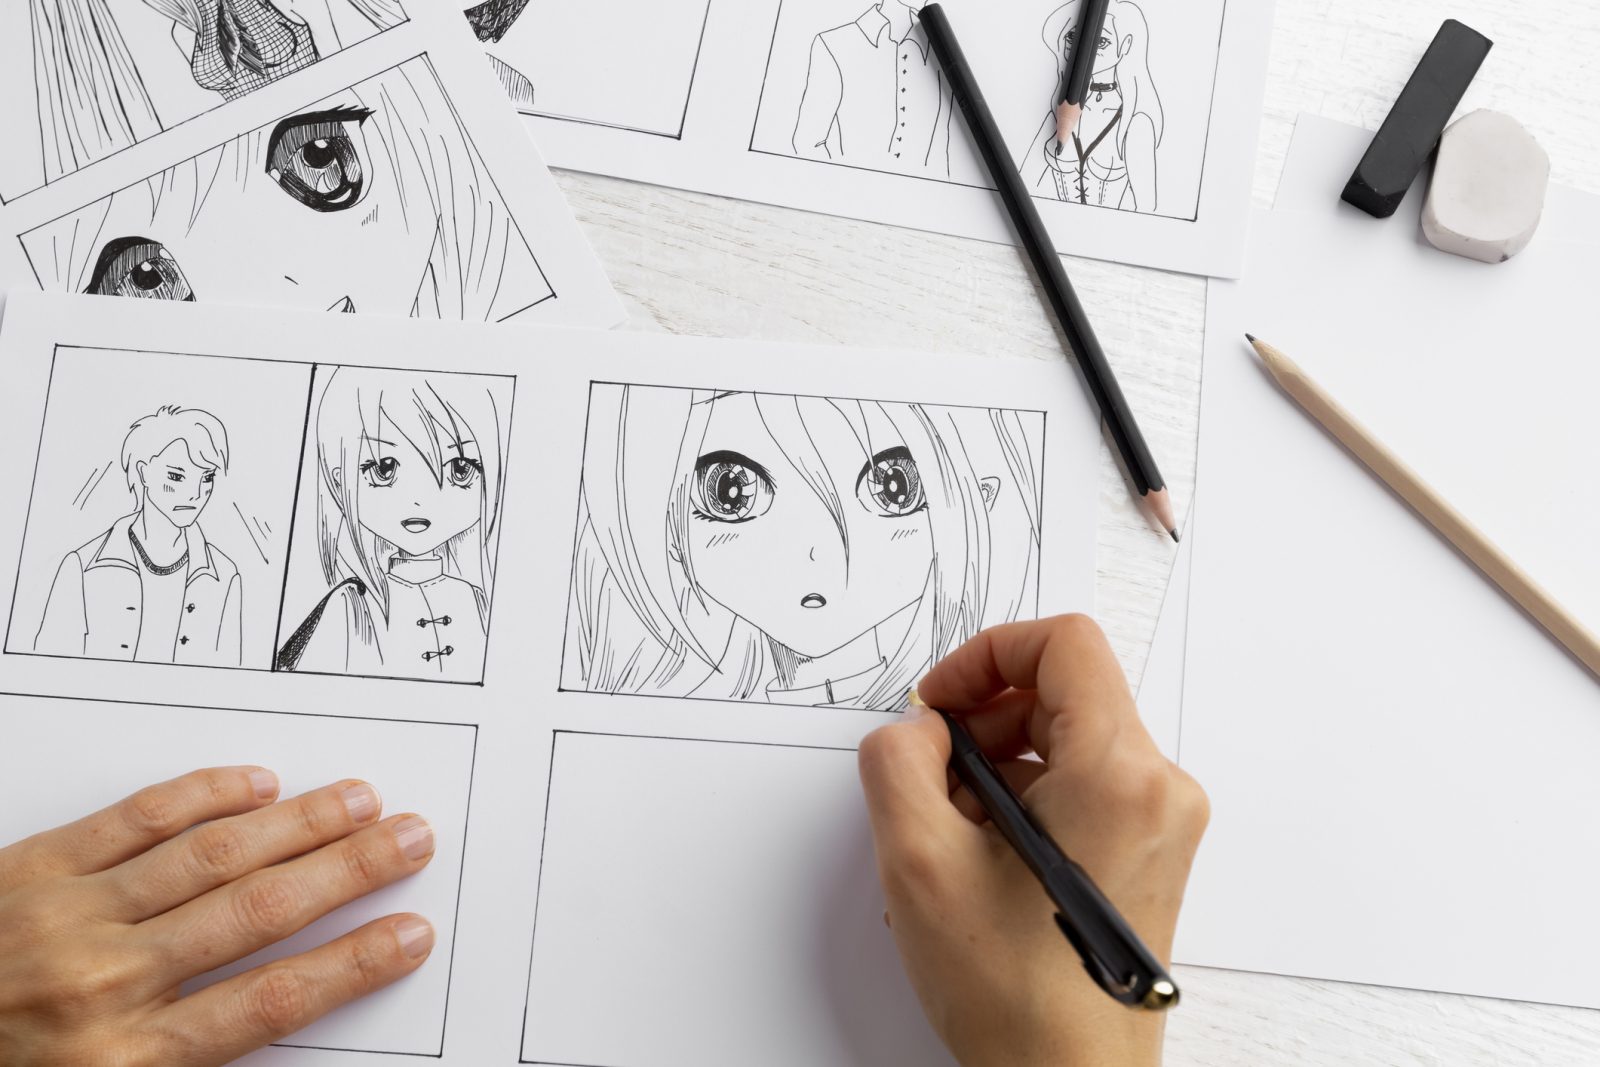 Hand Drawing a Cute Girl Anime Style Sketch with Alcohol Based Sketch  Drawing Markers Stock Photo - Image of education, paper: 209951638